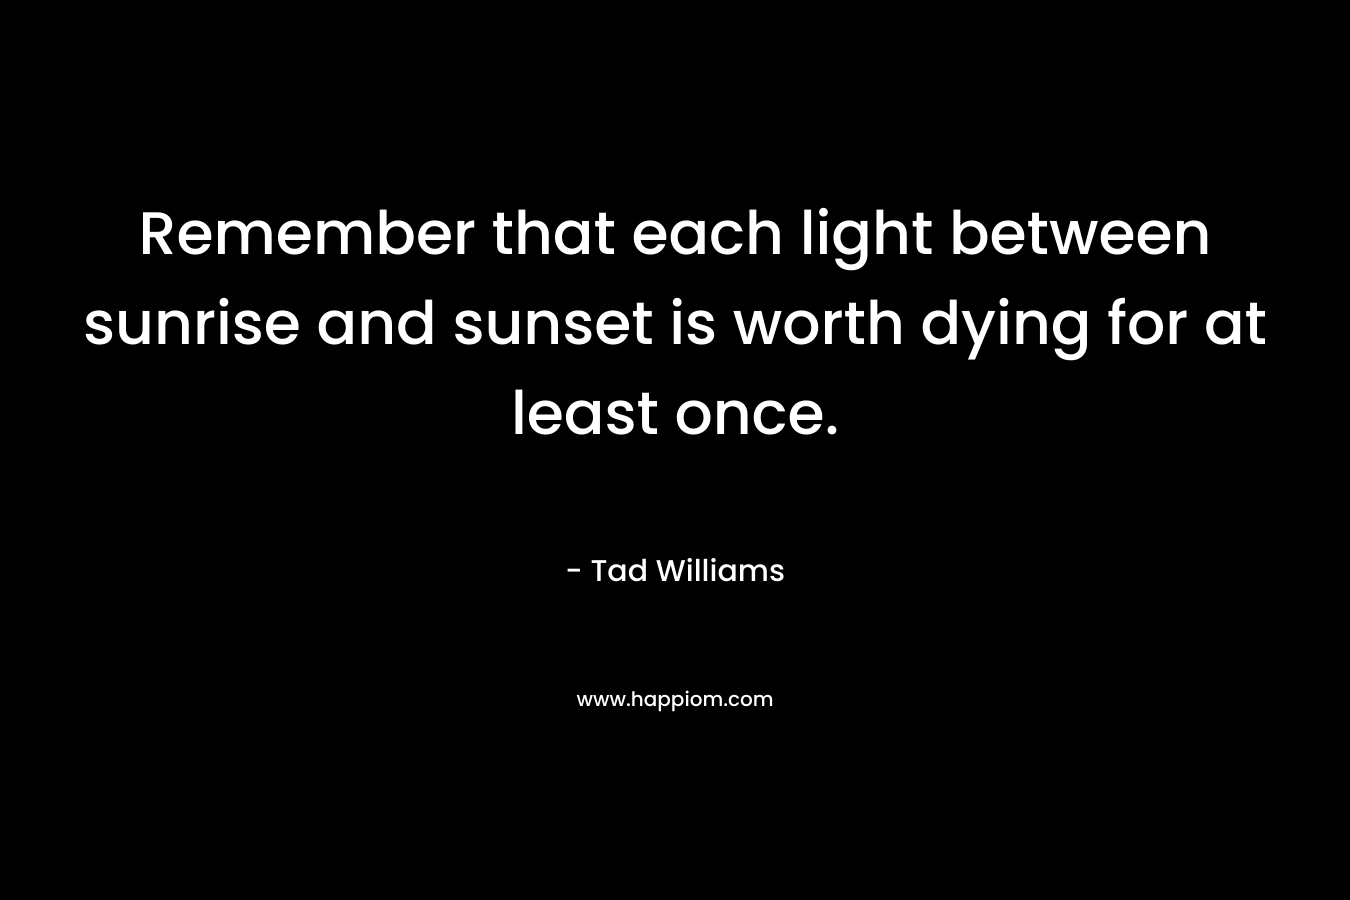 Remember that each light between sunrise and sunset is worth dying for at least once.